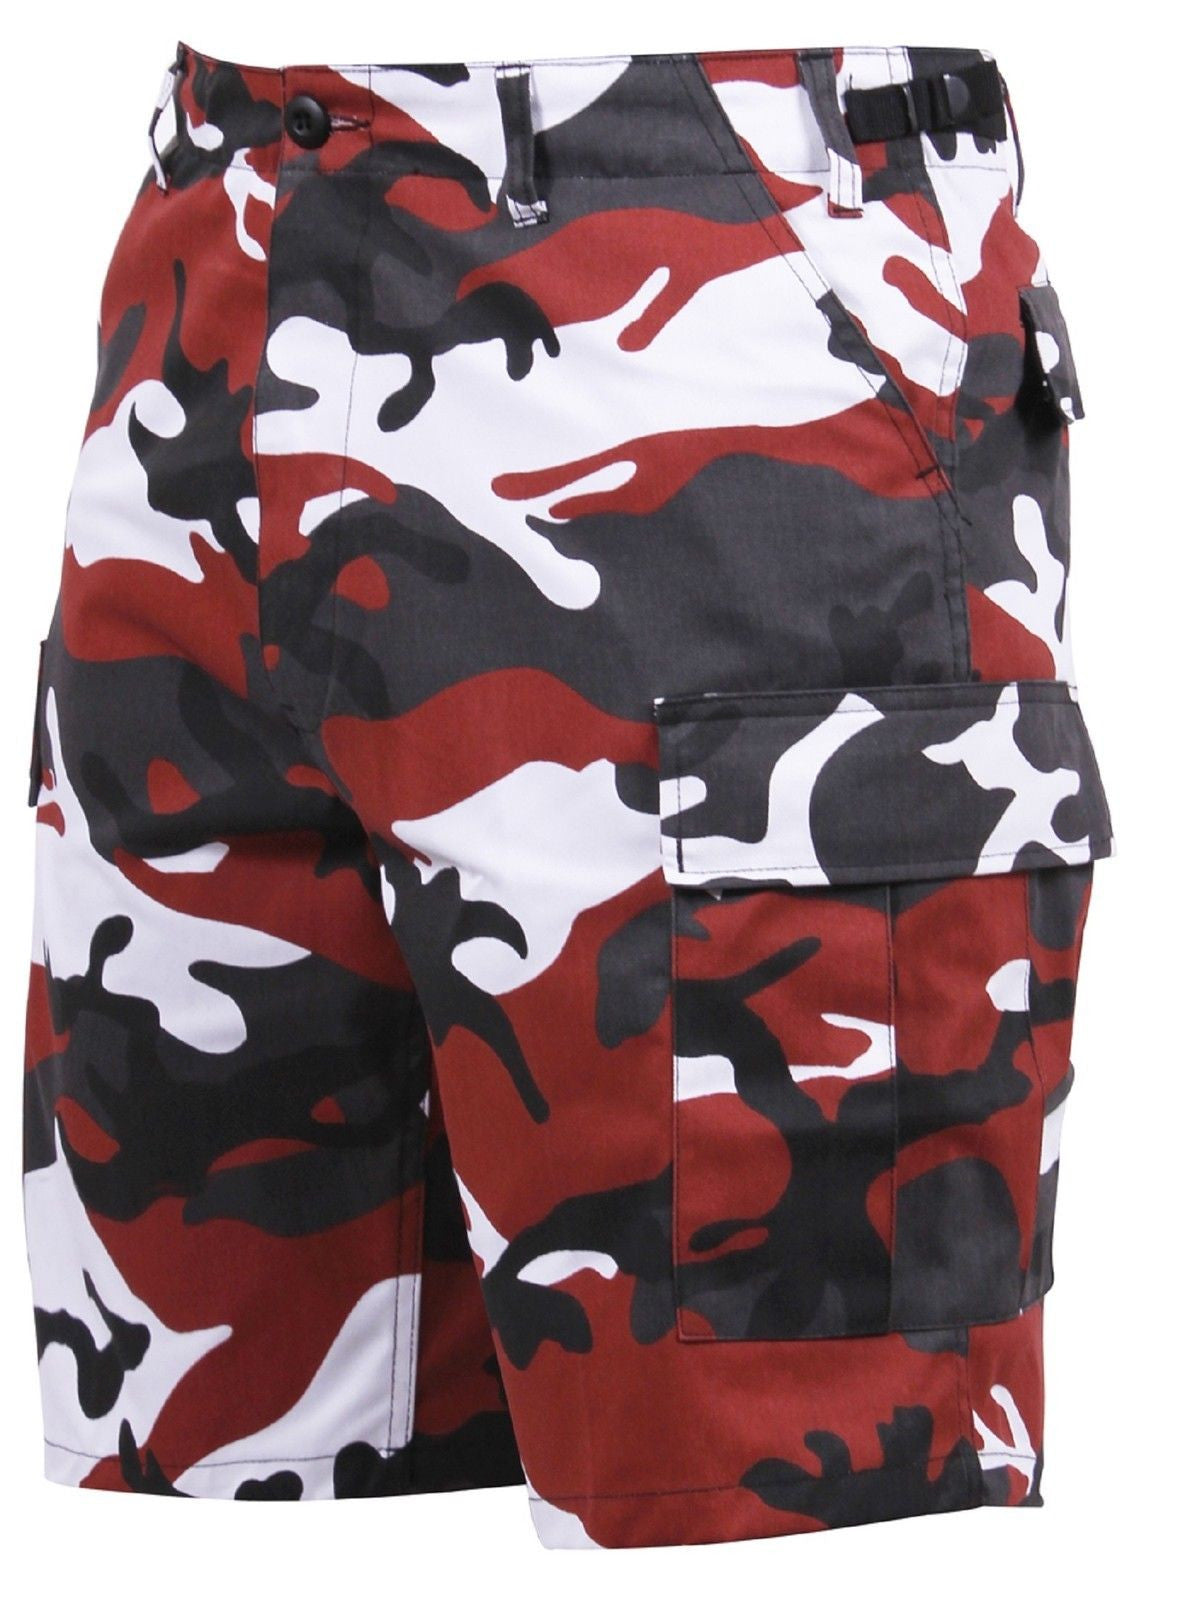 Men's Red Camouflage BDU Cargo Shorts - Black, Red & White Camo Shorts